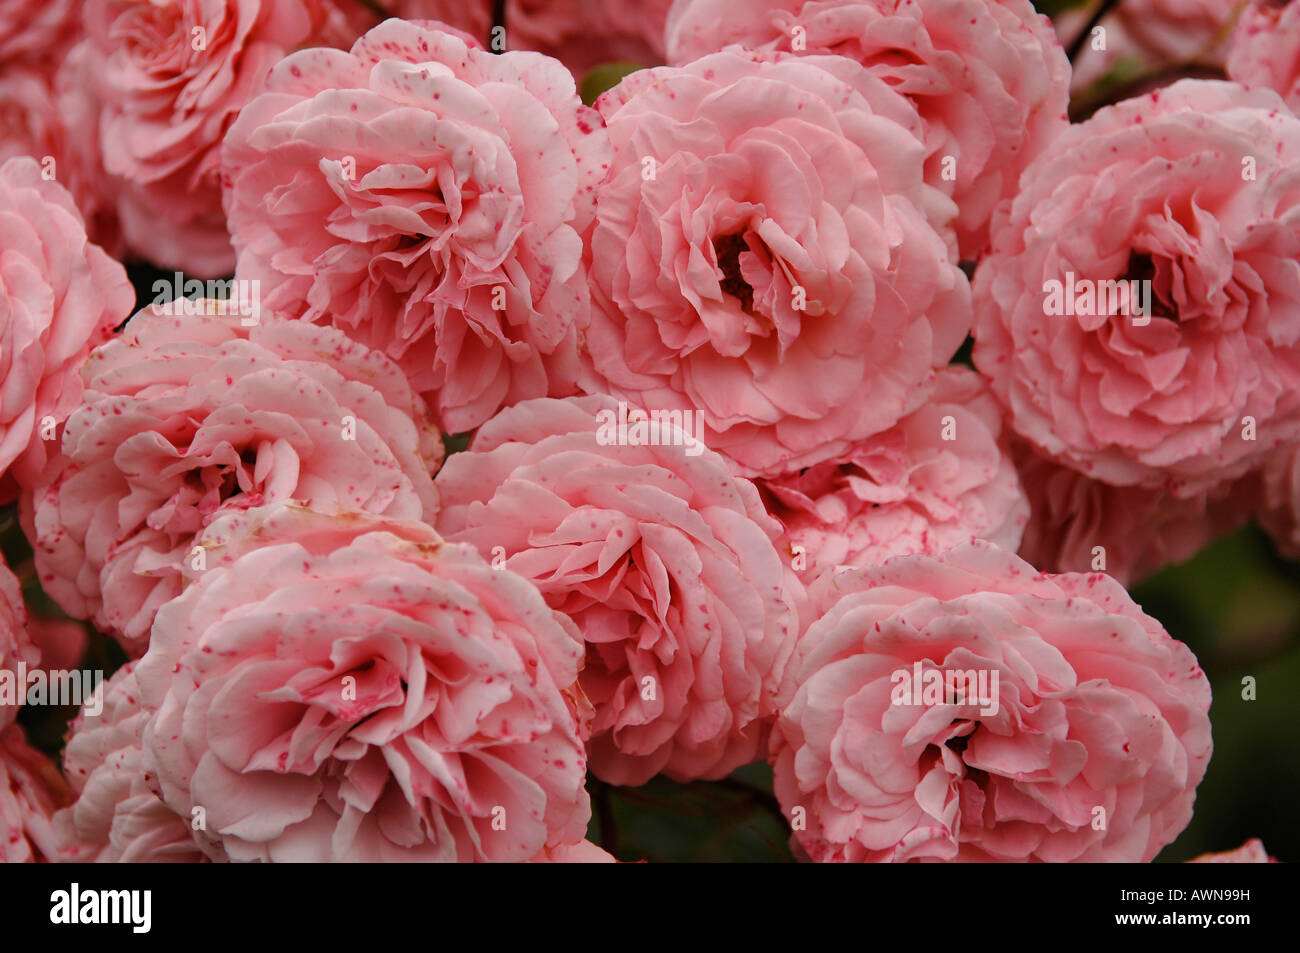 Pink rose blossoms, Midlands, England, Europe Stock Photo